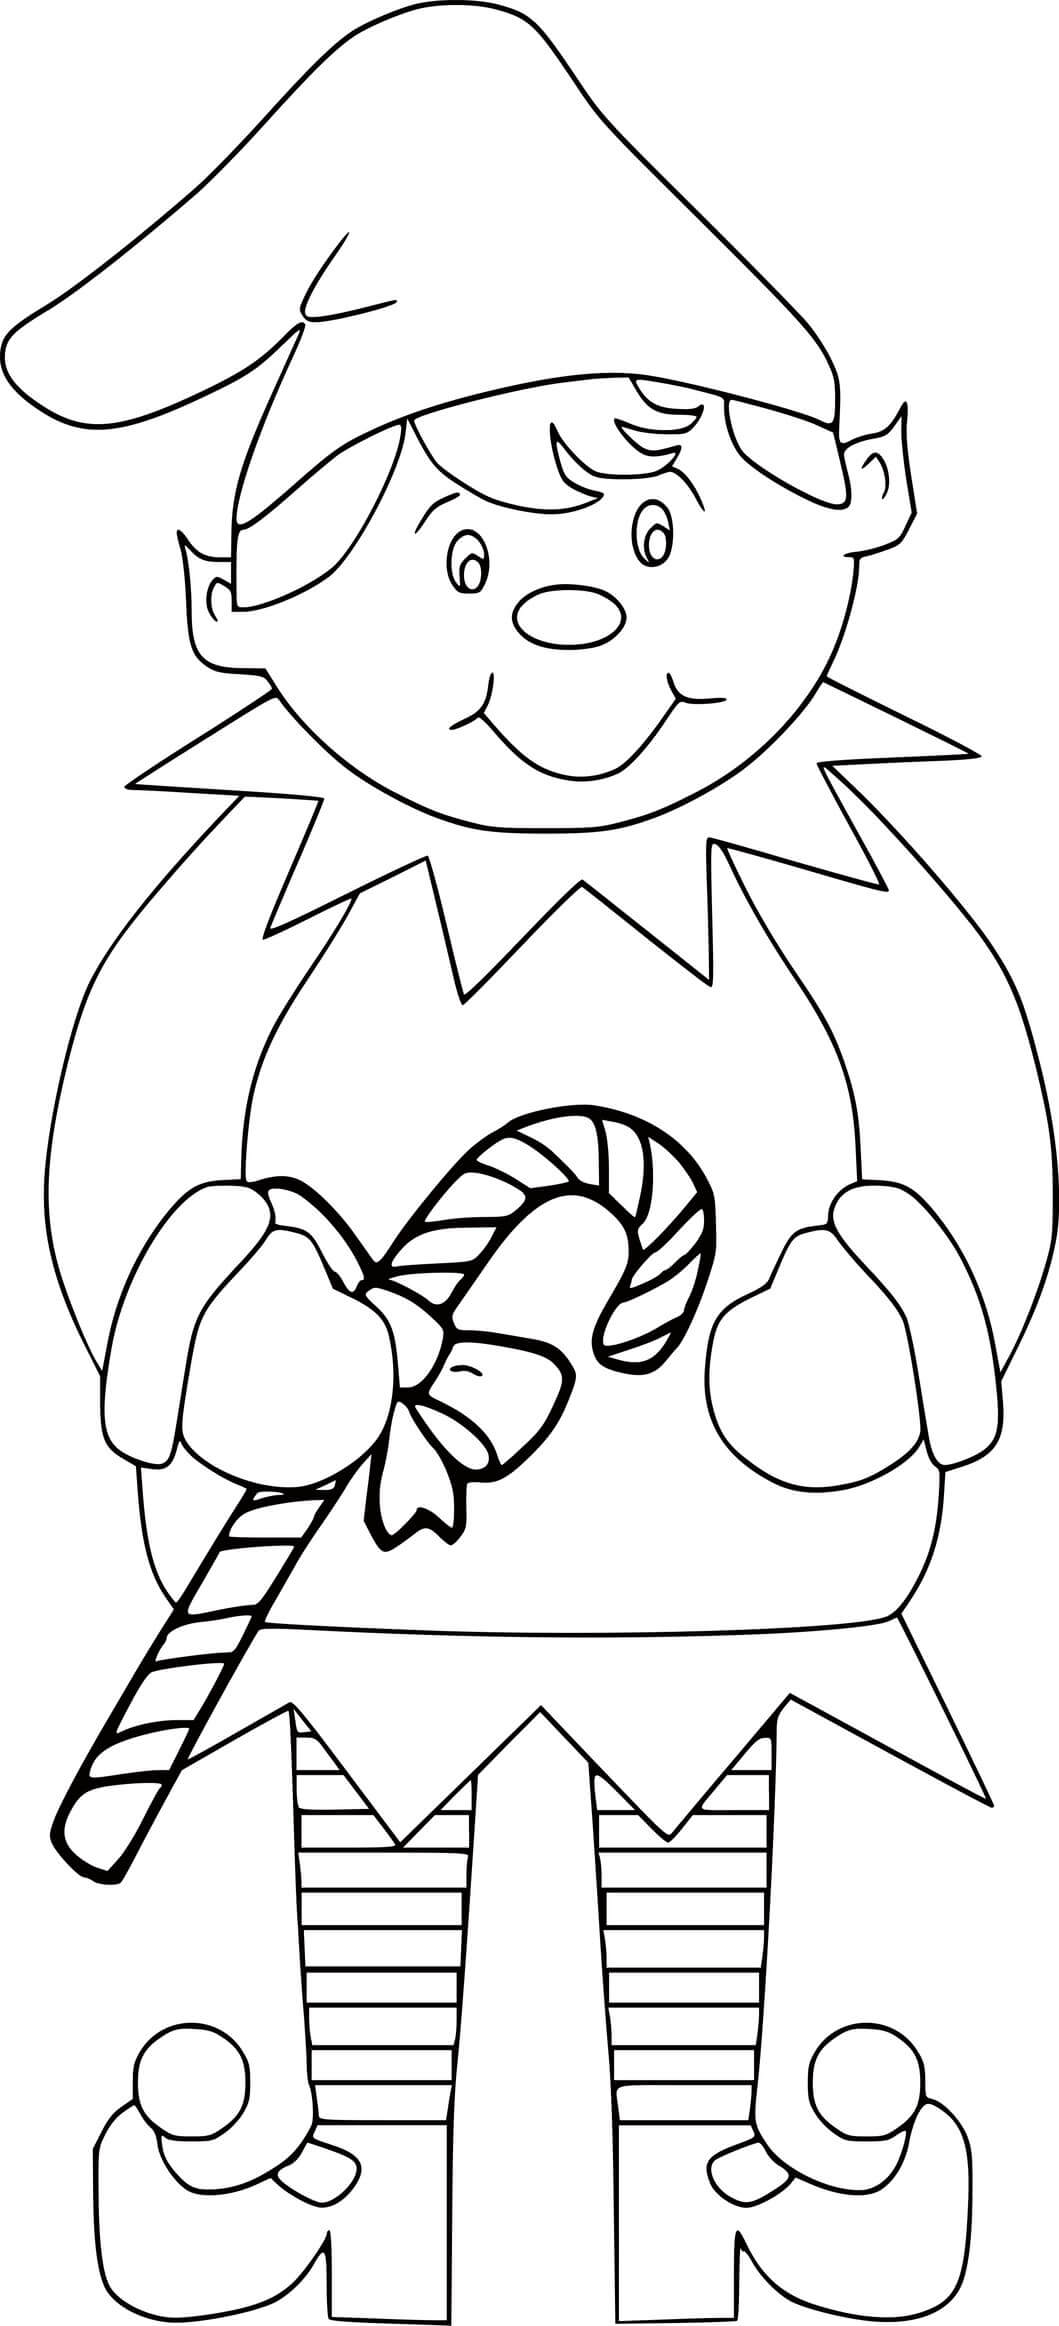 Fat Elf Holds A Candy Cane Coloring Page